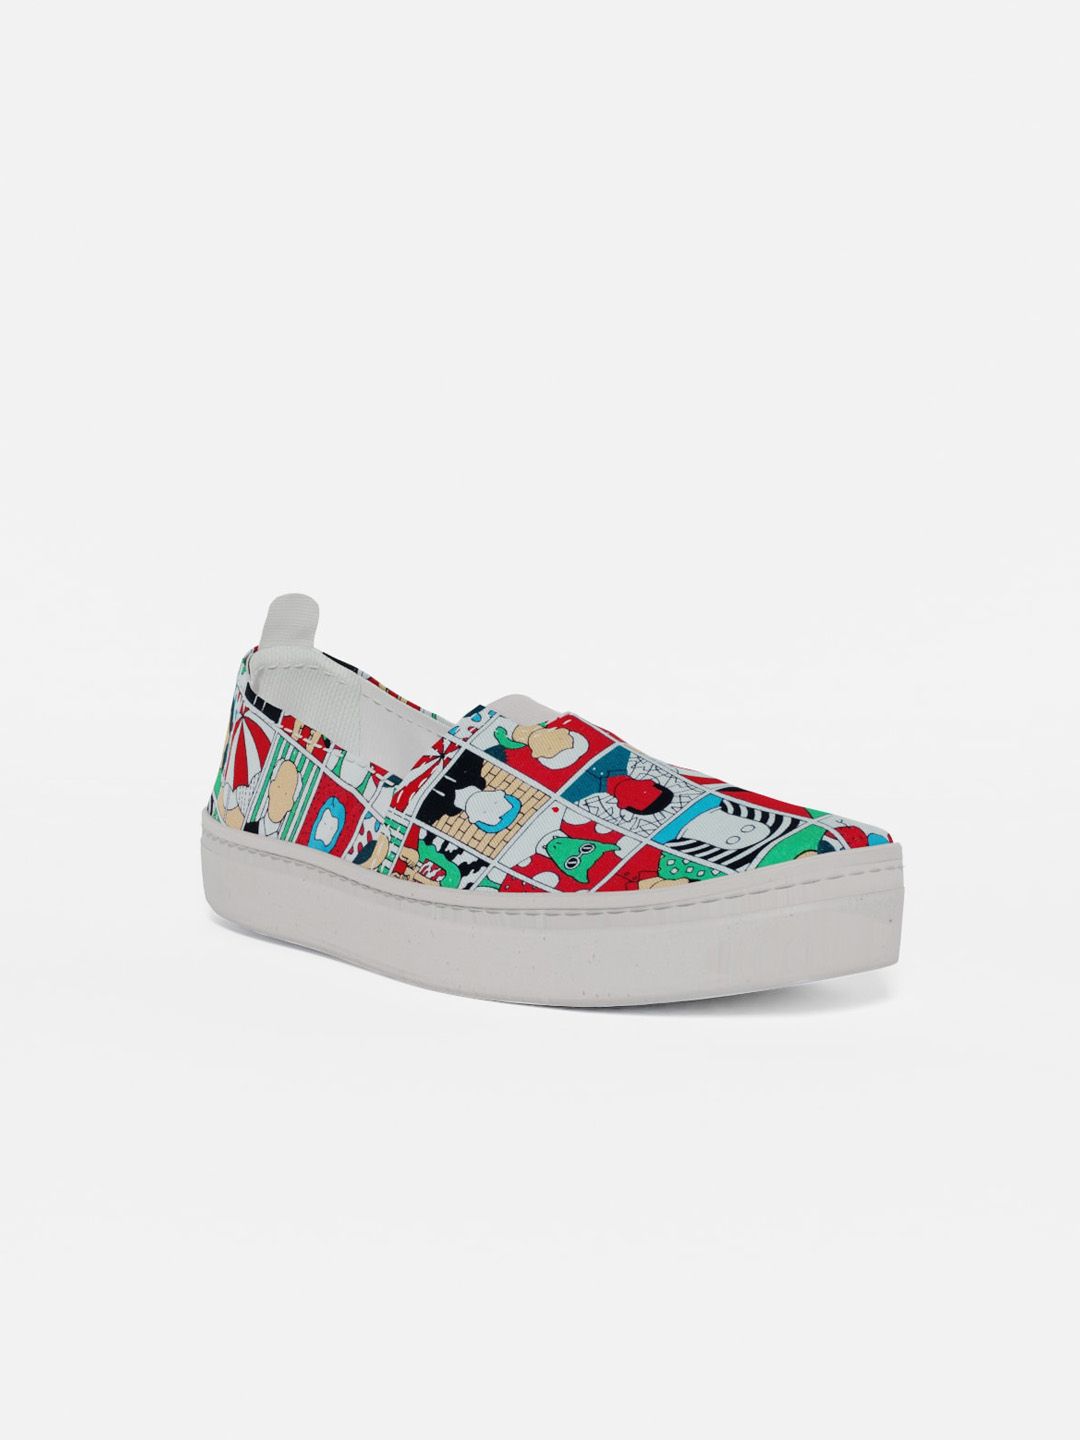 LOKAIT The Sneakers Company Women Multicoloured Printed Slip-On Sneakers Price in India